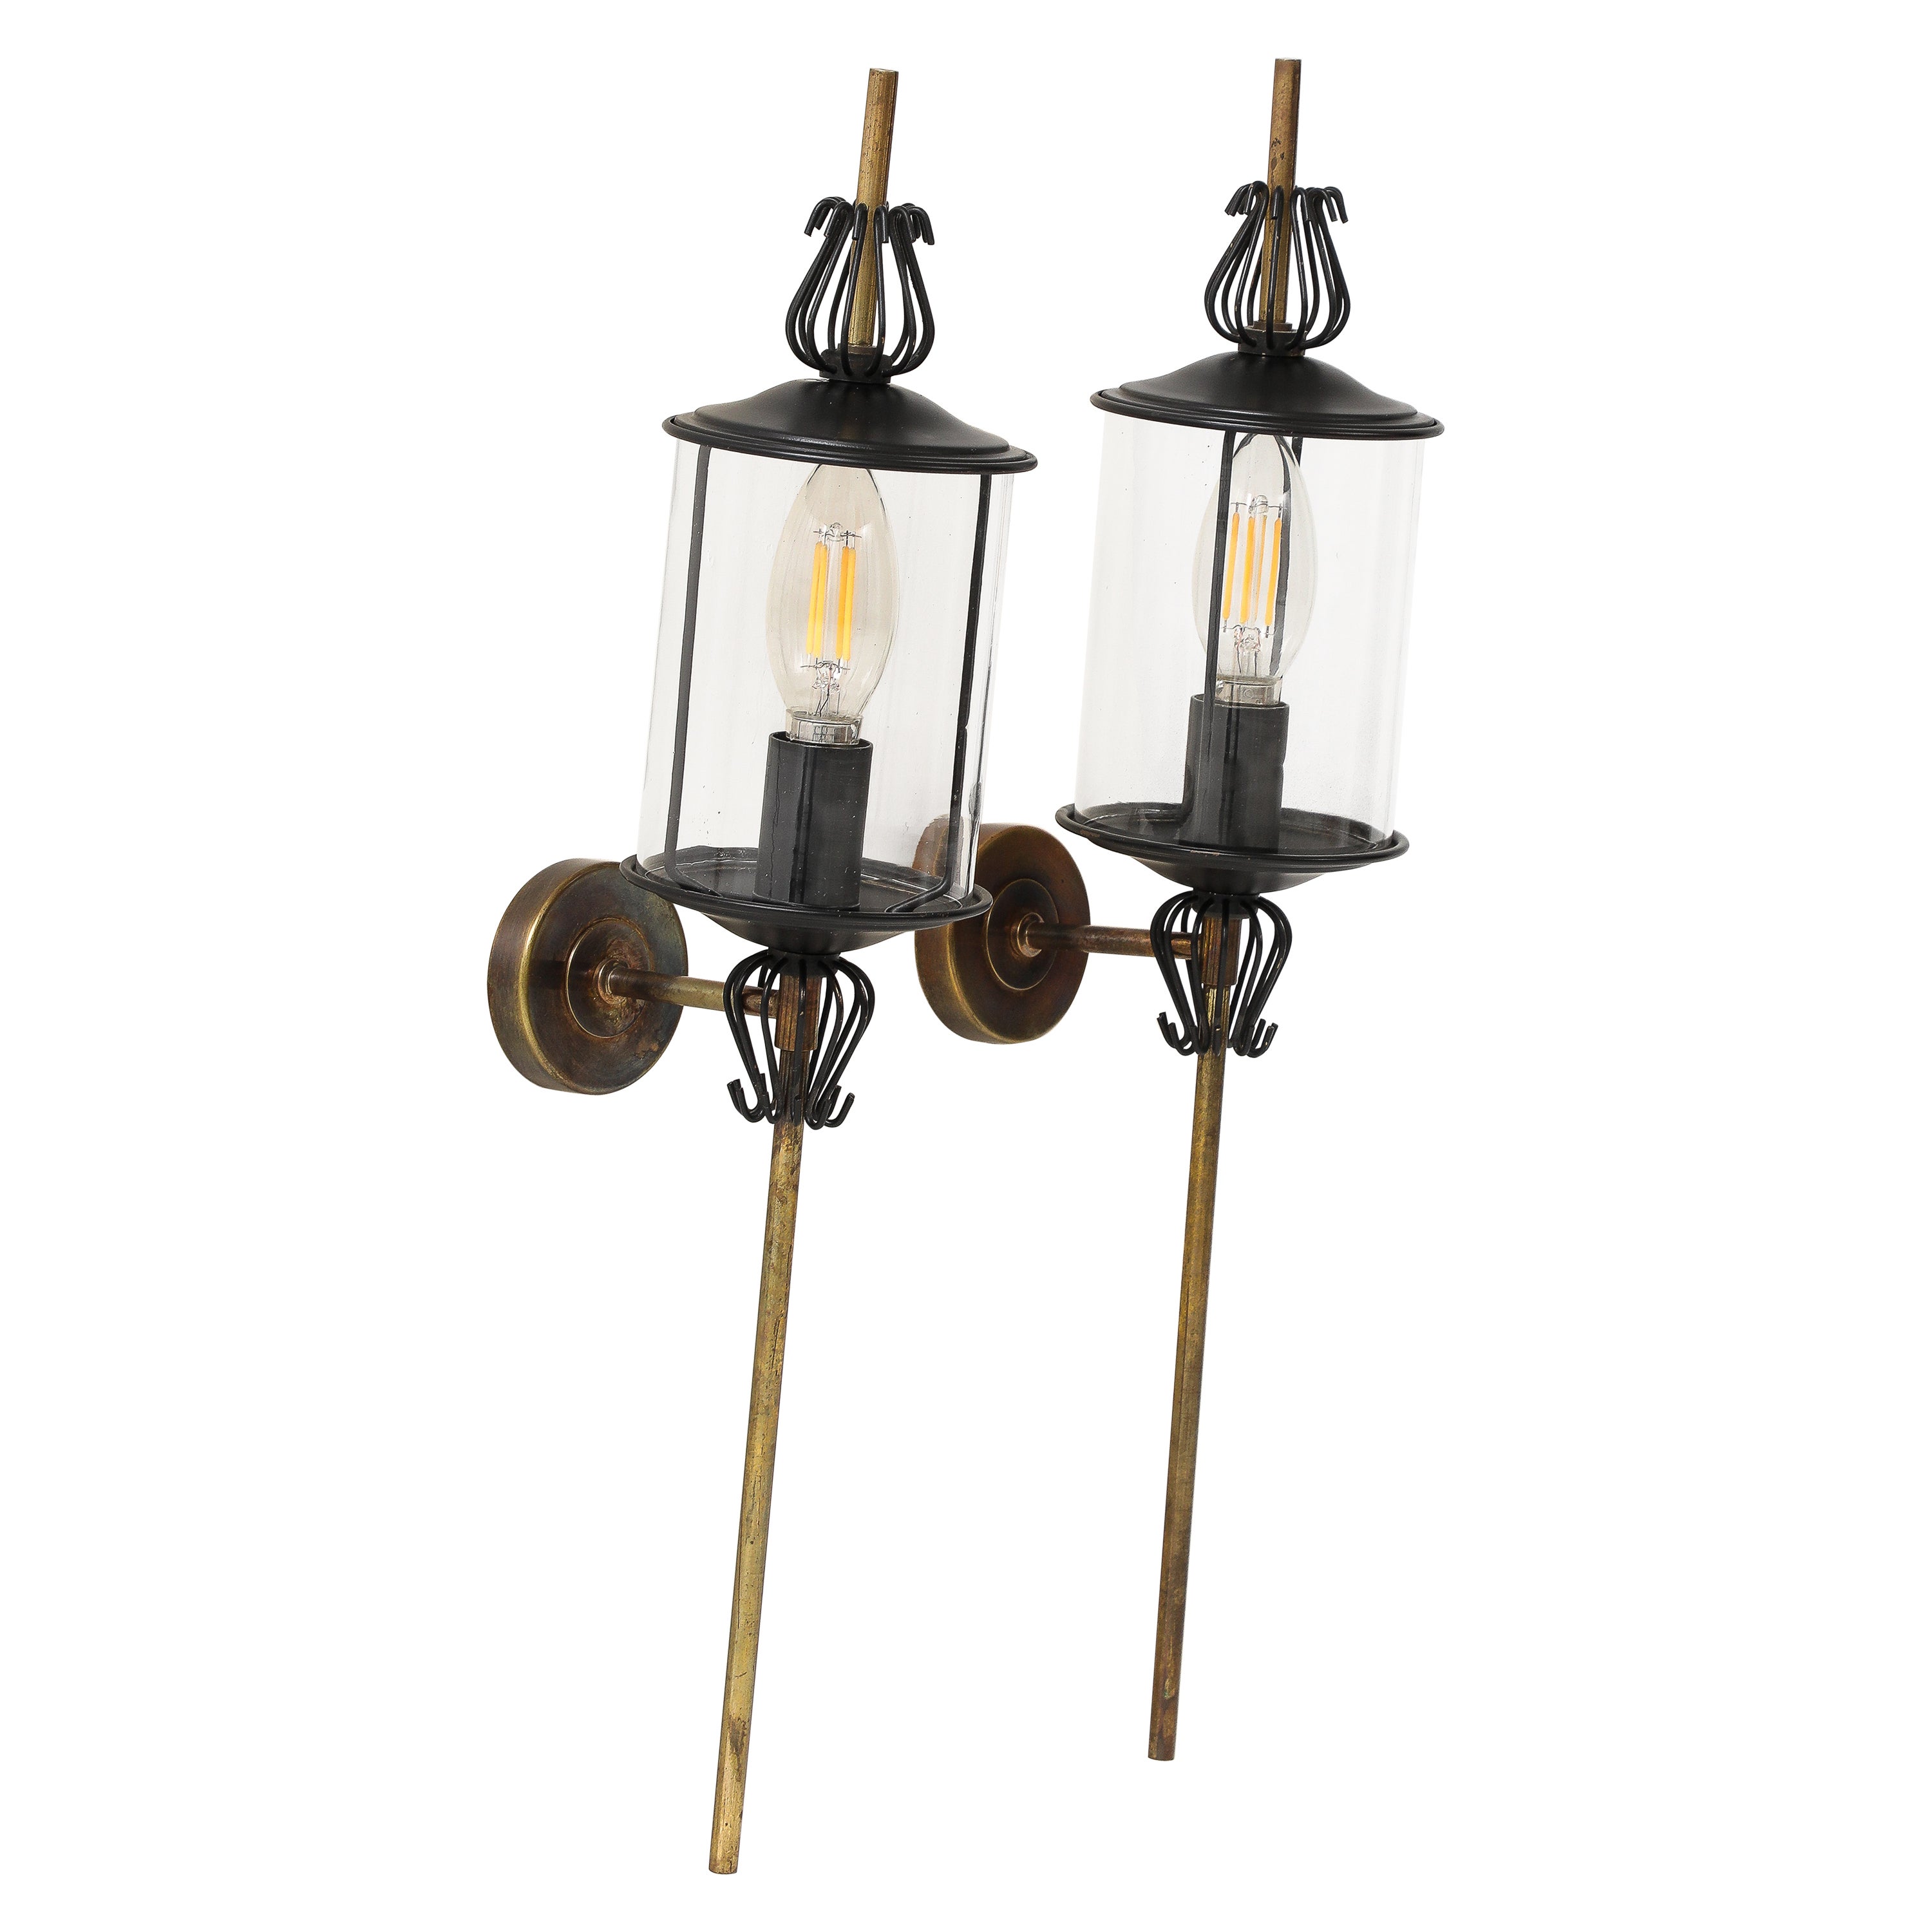 Black Enameled Steel, Tole, Brass and Glass Sconces by Lunel - France 1960's For Sale